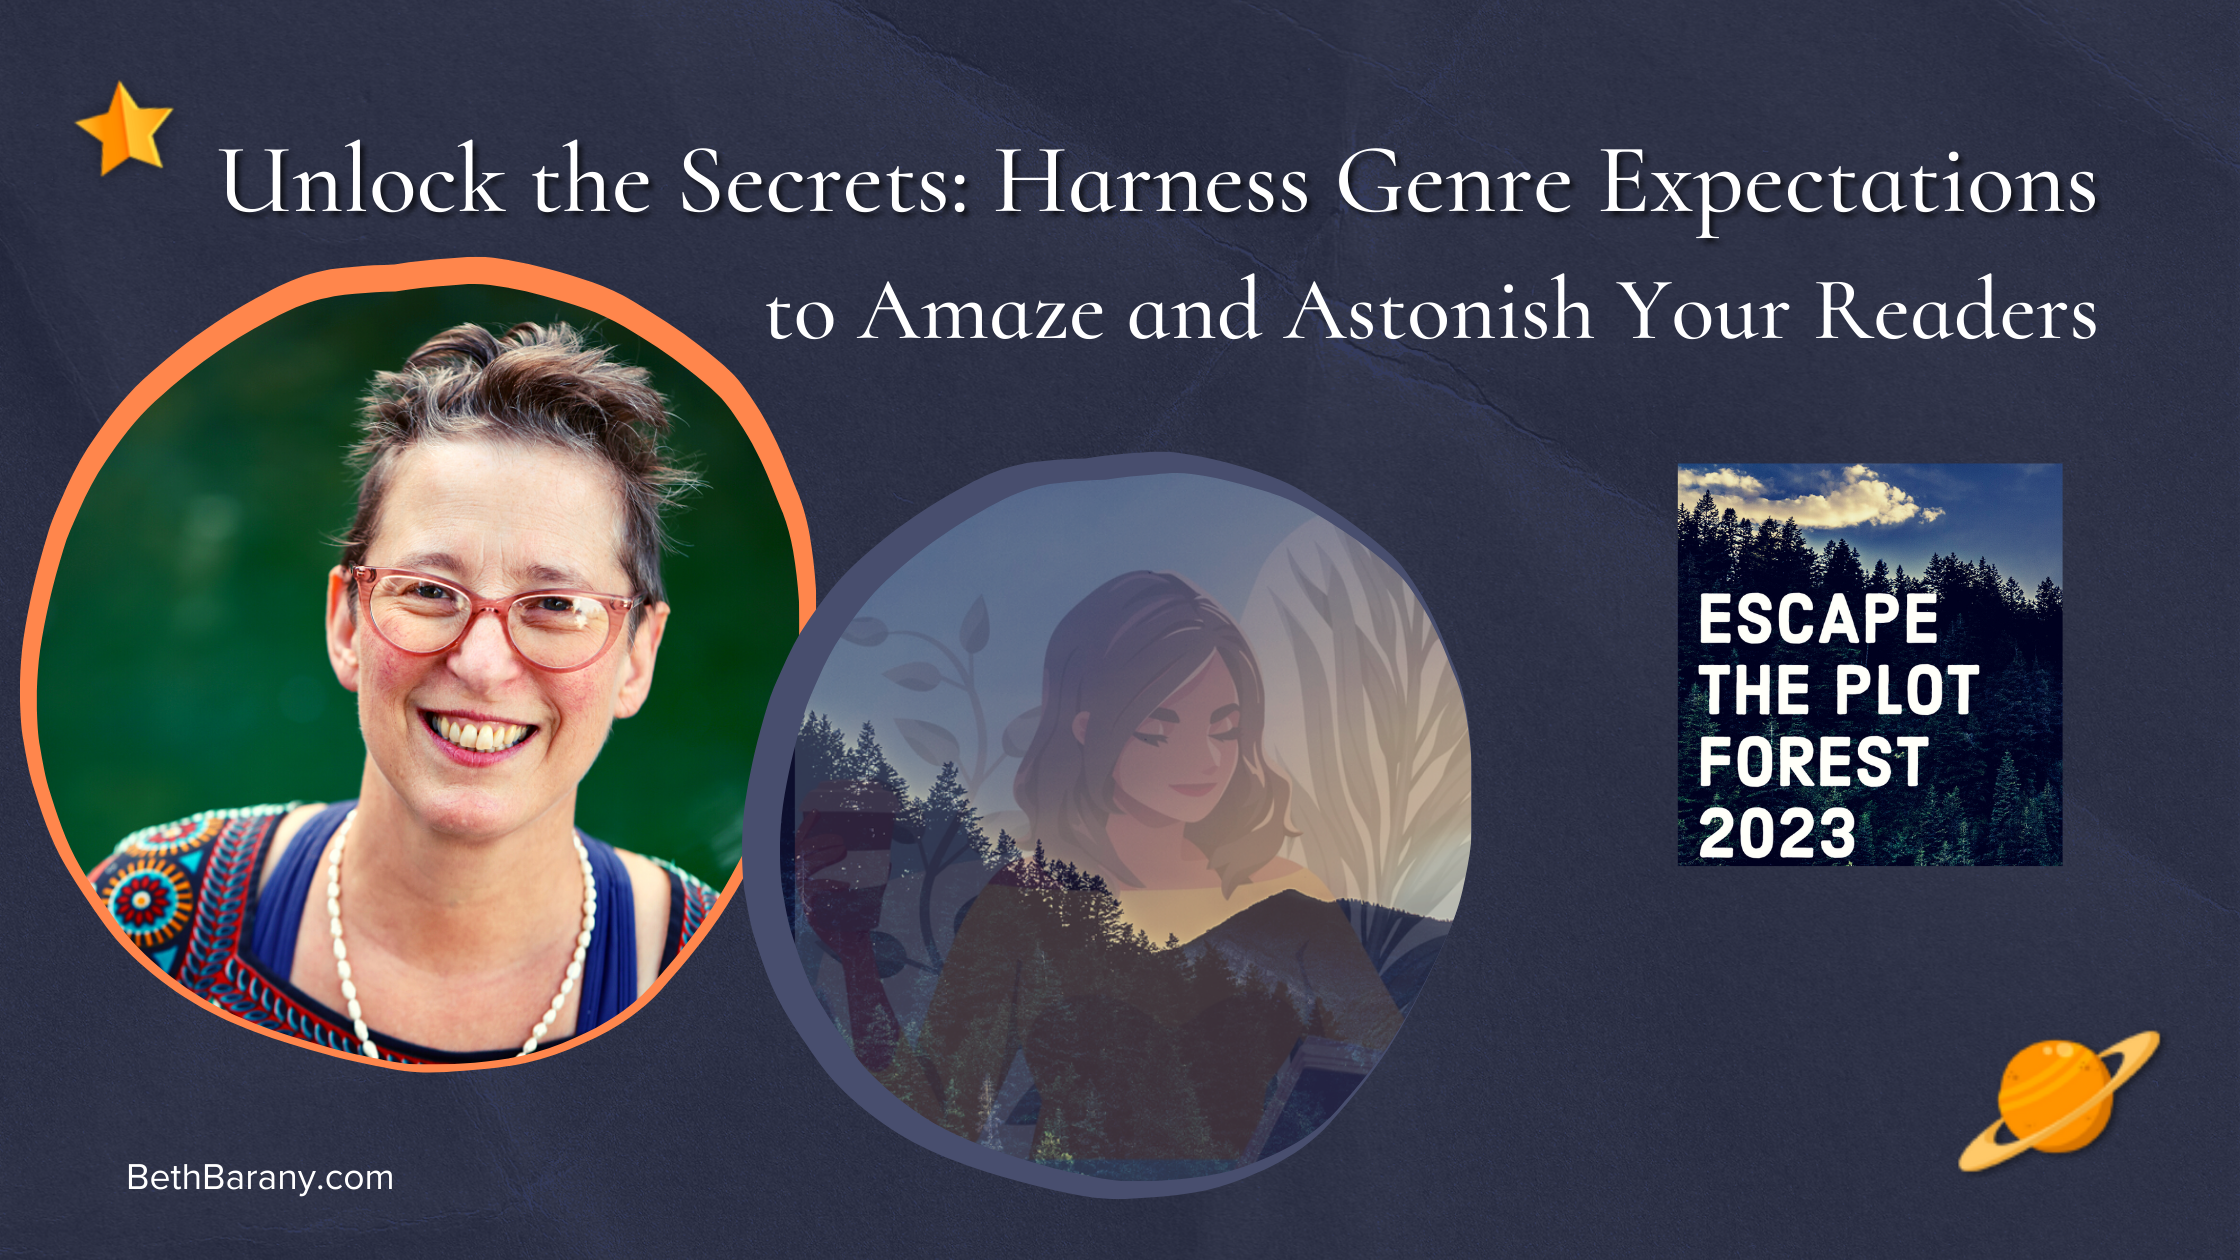 Unlock the Secrets: Harness Genre Expectations, at Plot forest, Beth Barany speaks with Daniel David Wallace